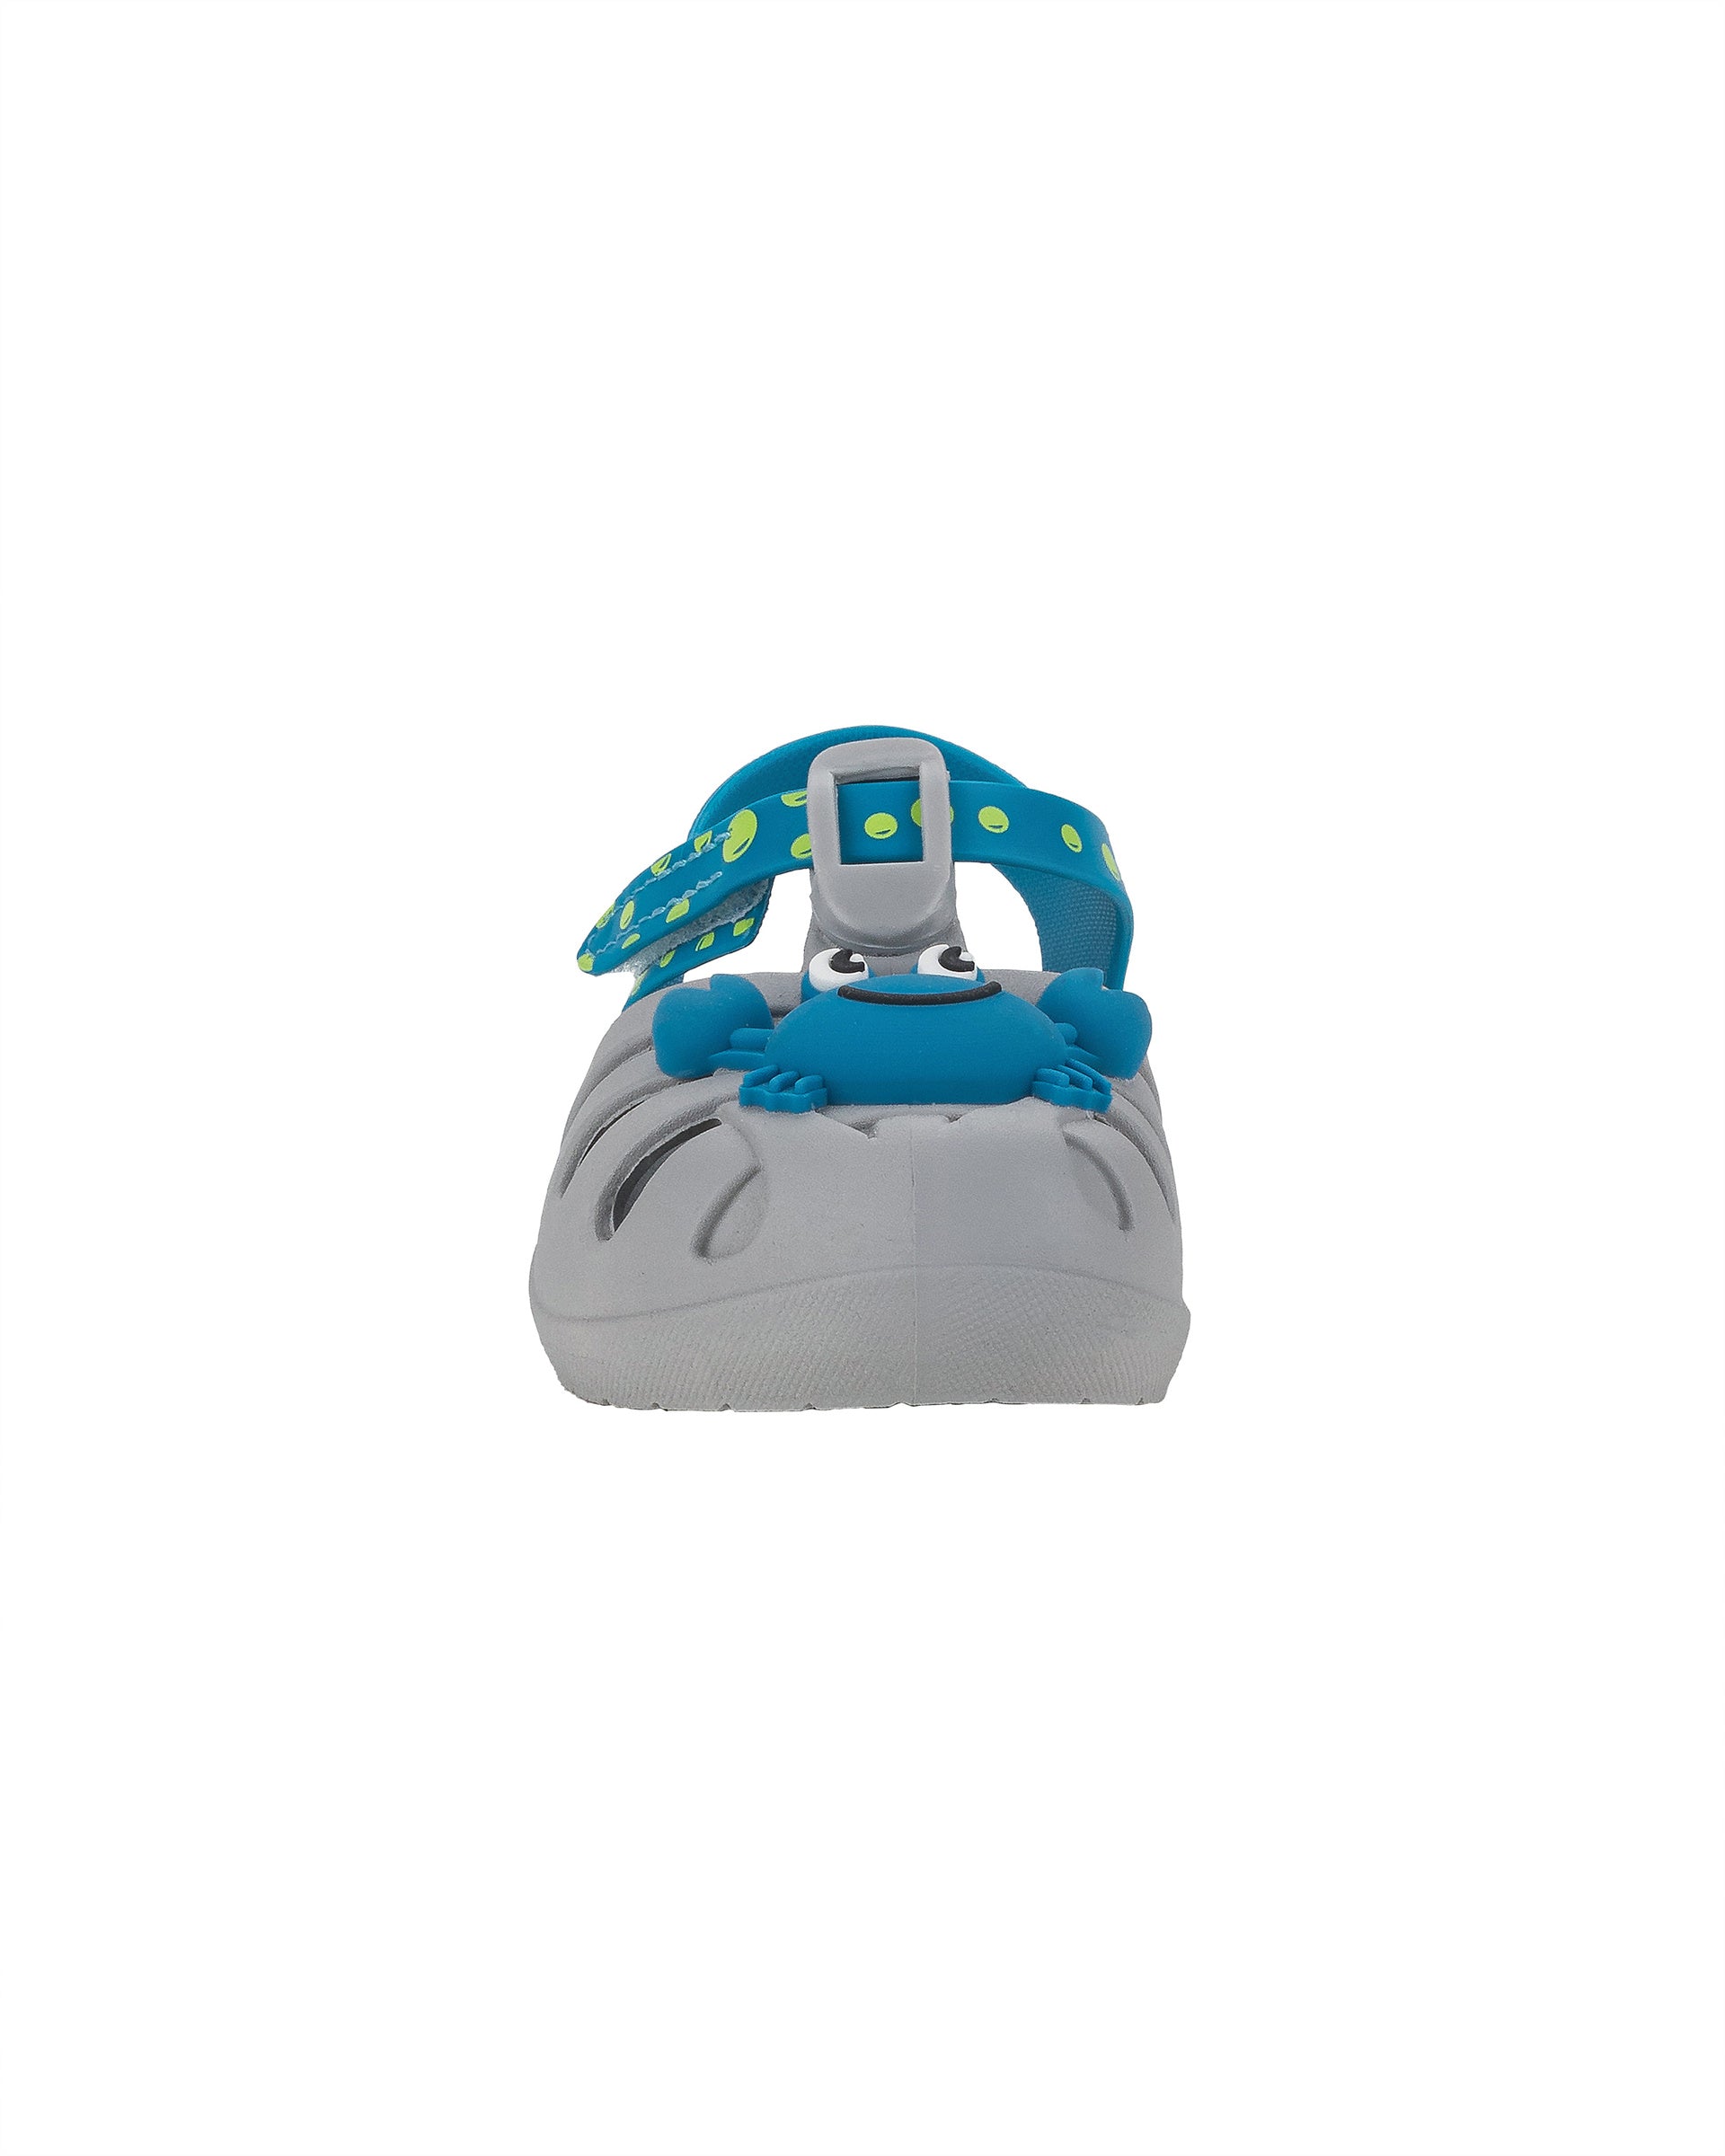 Front view of a grey and blue Ipanema Summer baby fisherman sandal with blue crab on upper and green bubbles on a blue strap.